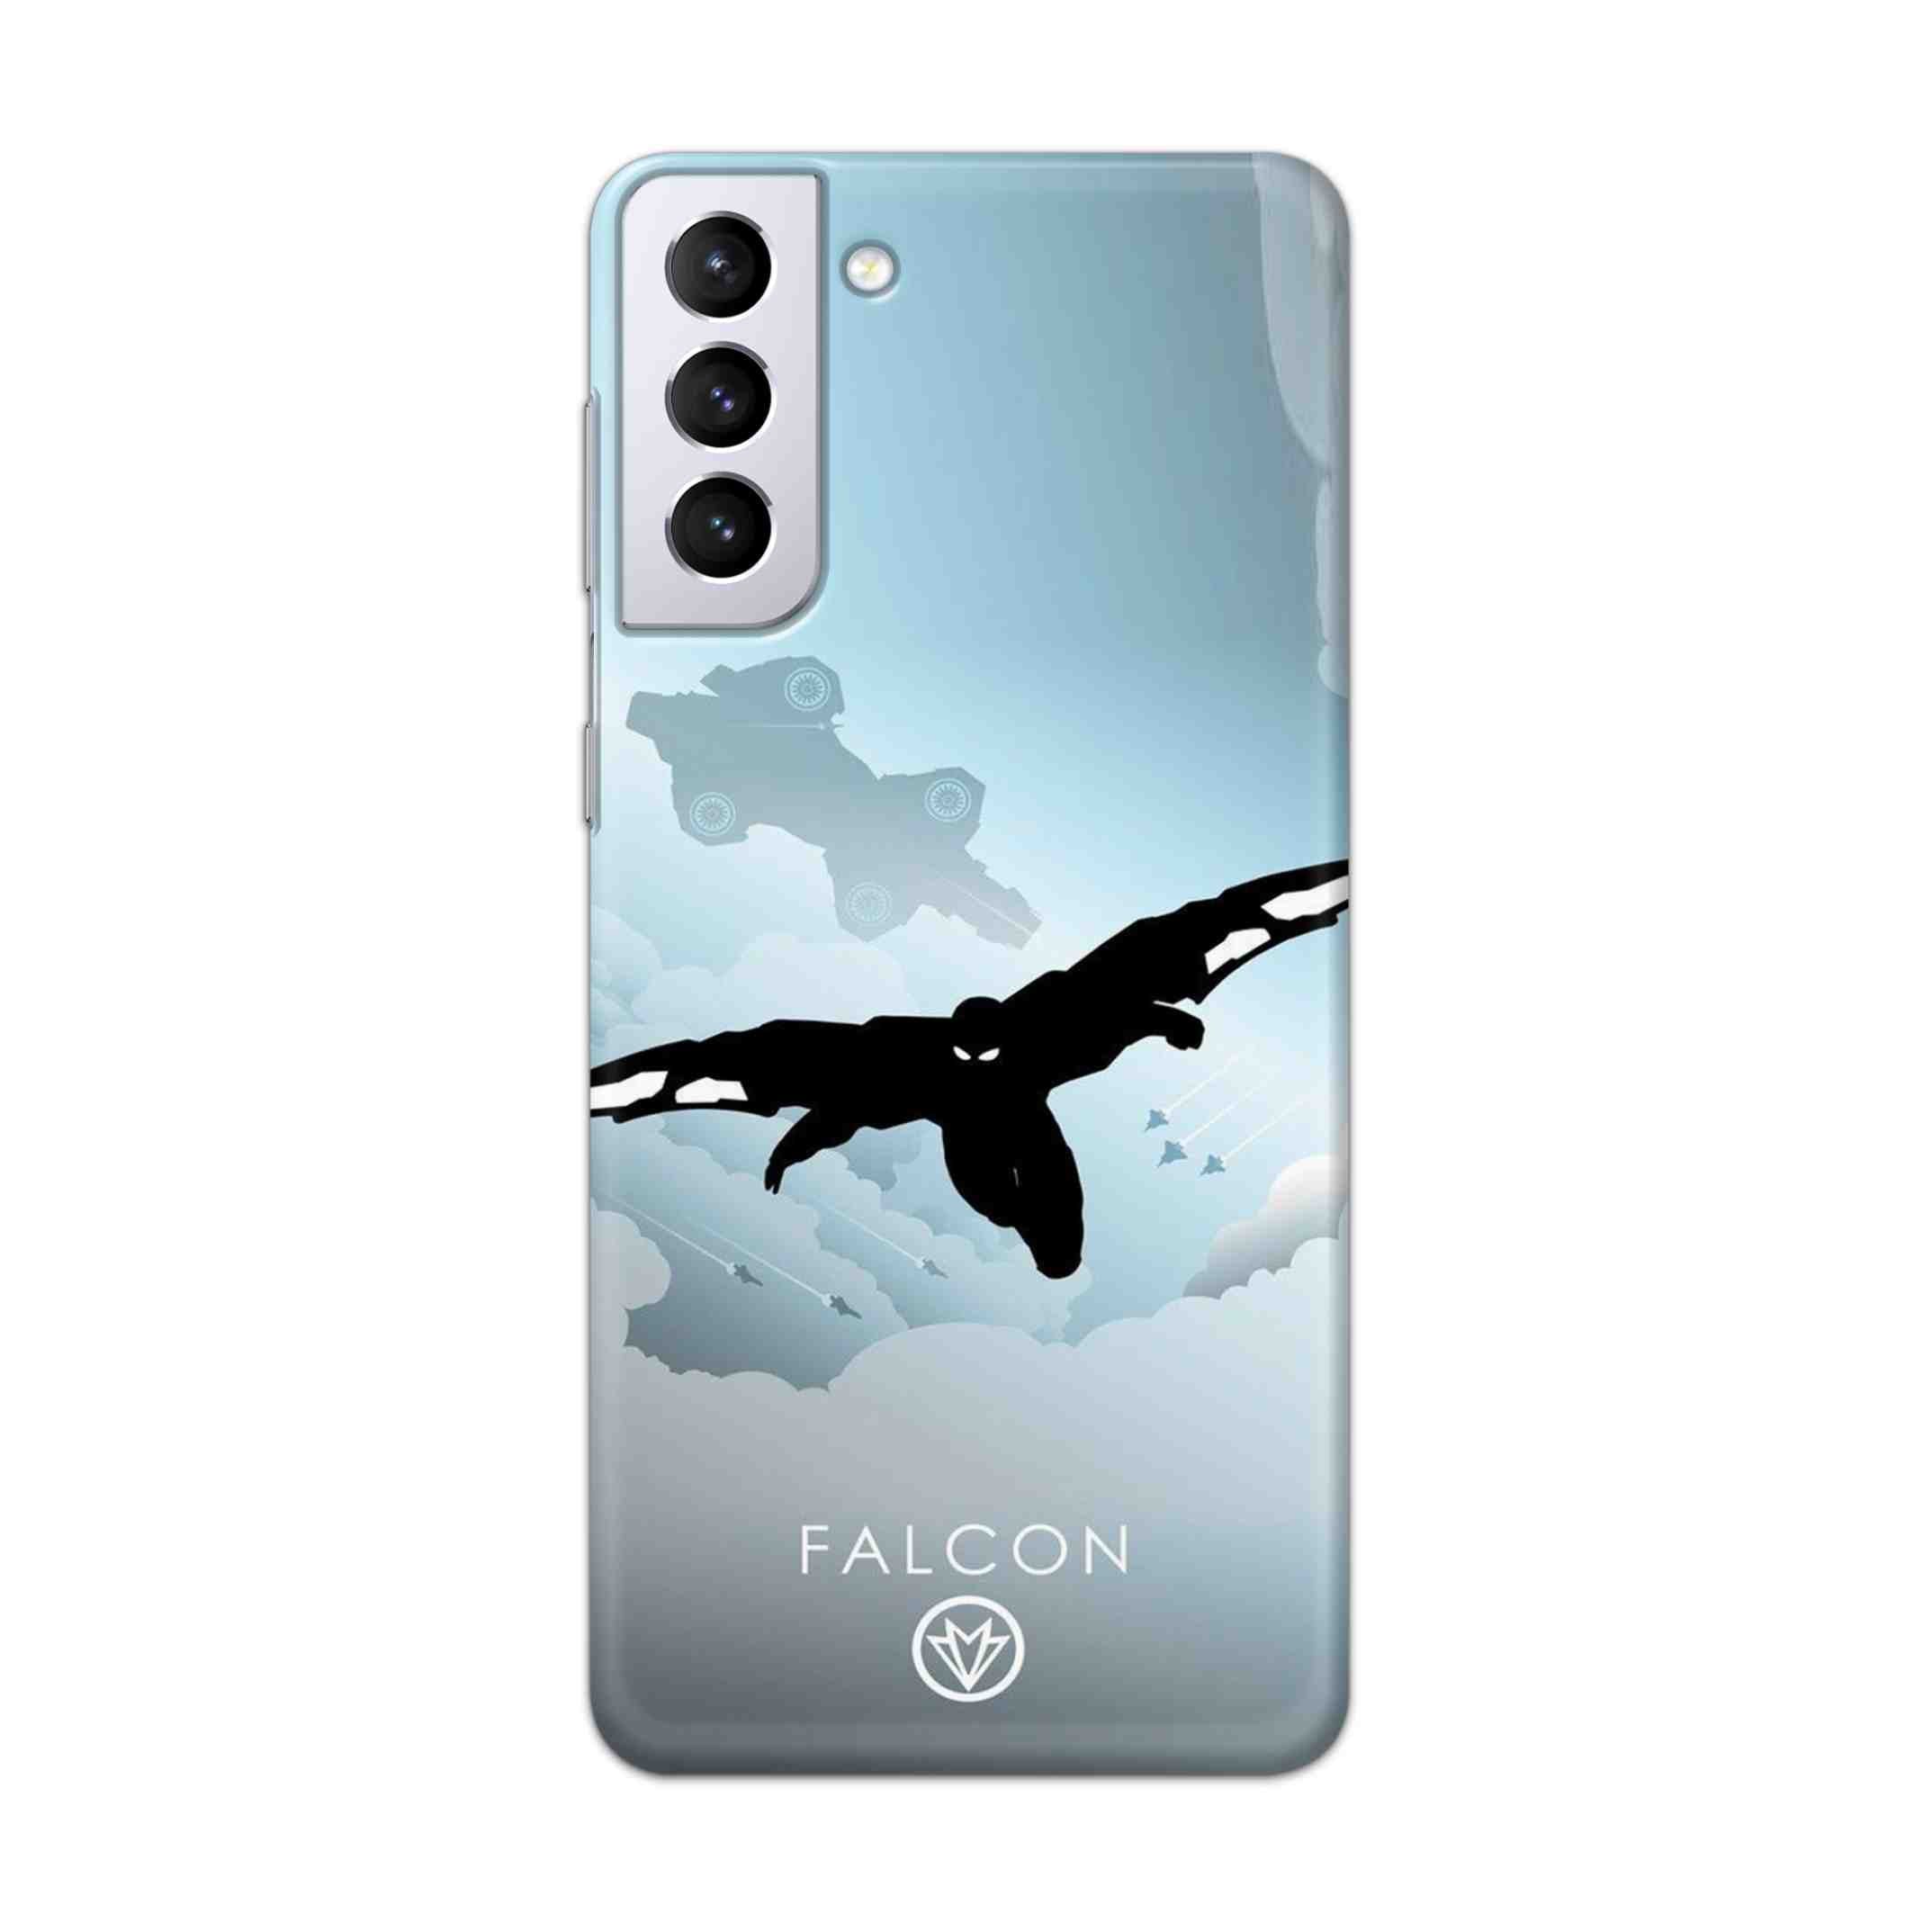 Buy Falcon Hard Back Mobile Phone Case Cover For Samsung Galaxy S21 Plus Online